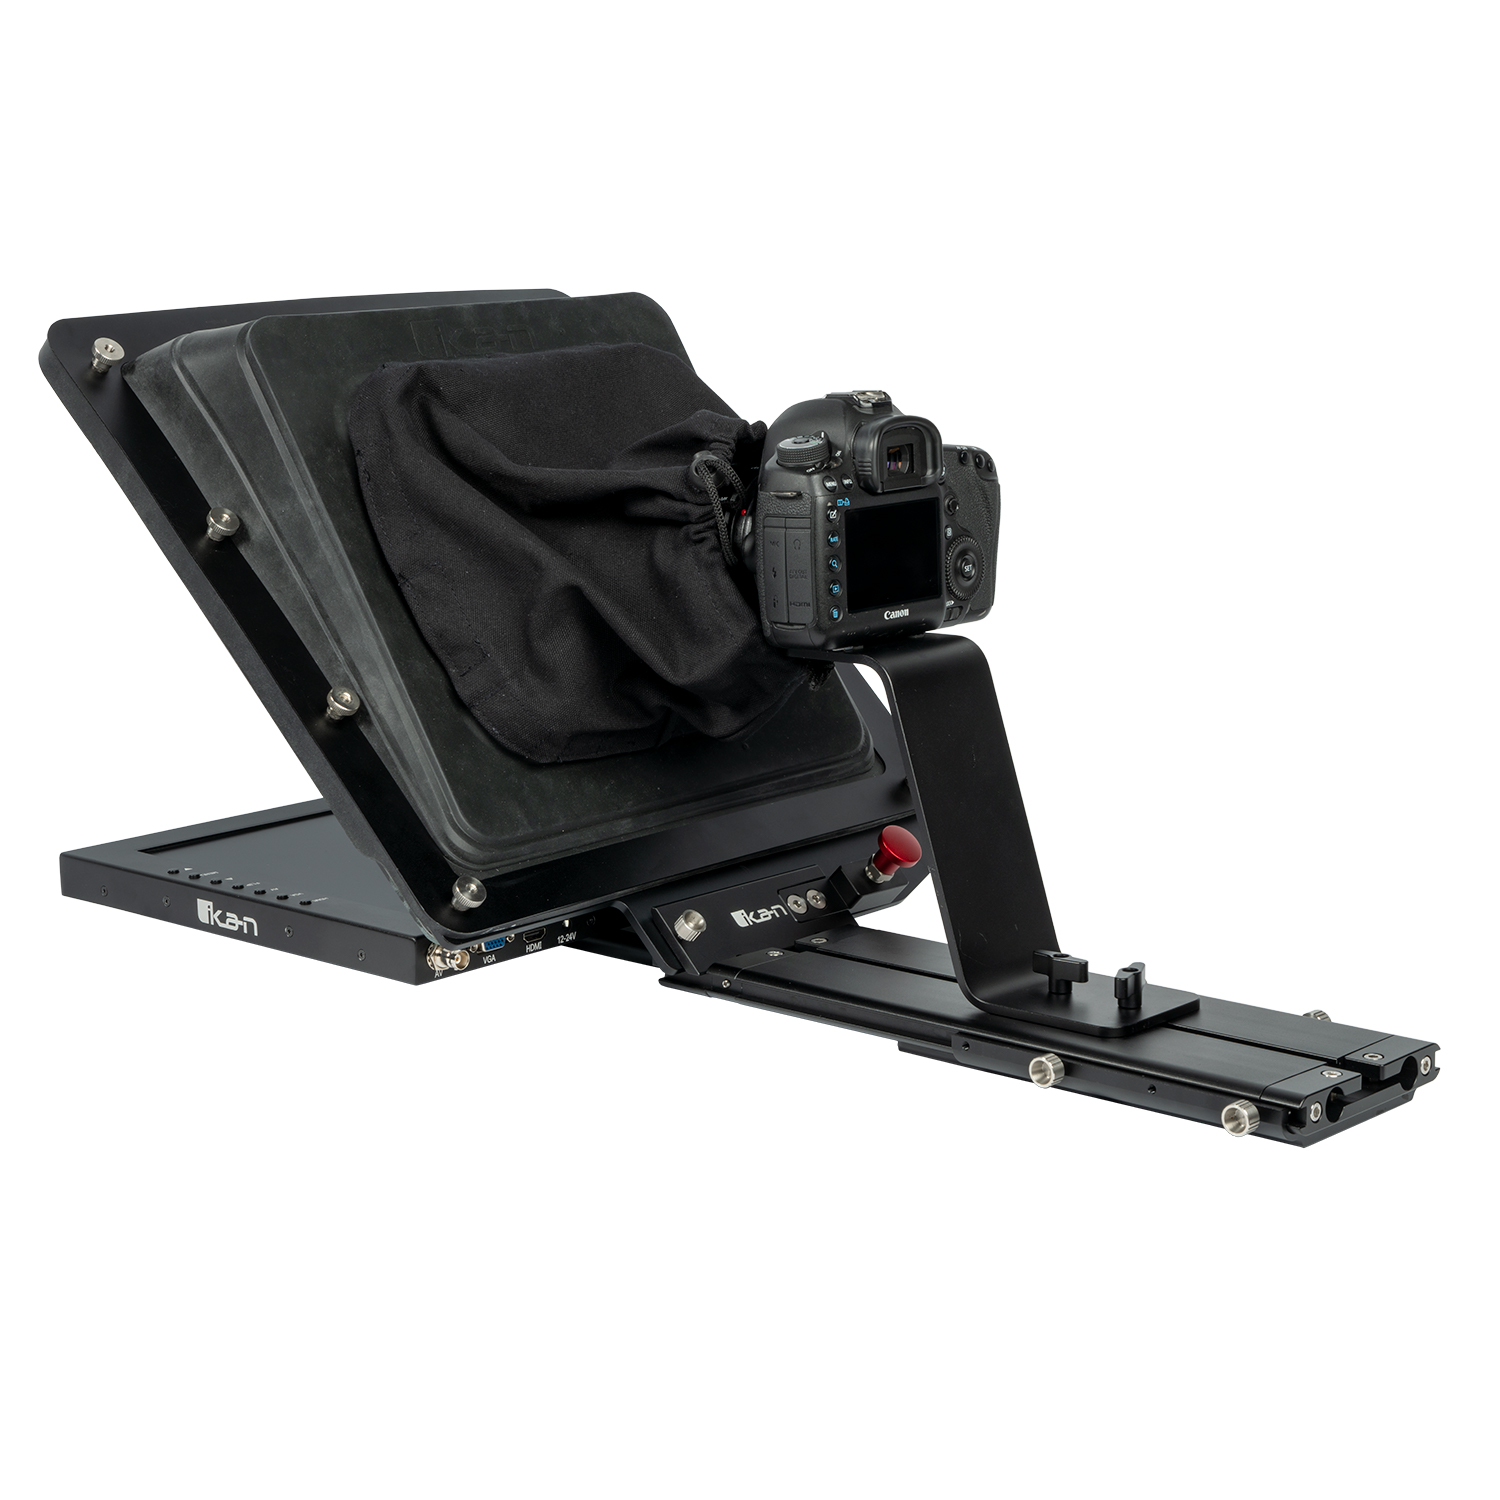 ikan PT4700-SDI Prompter System for rent